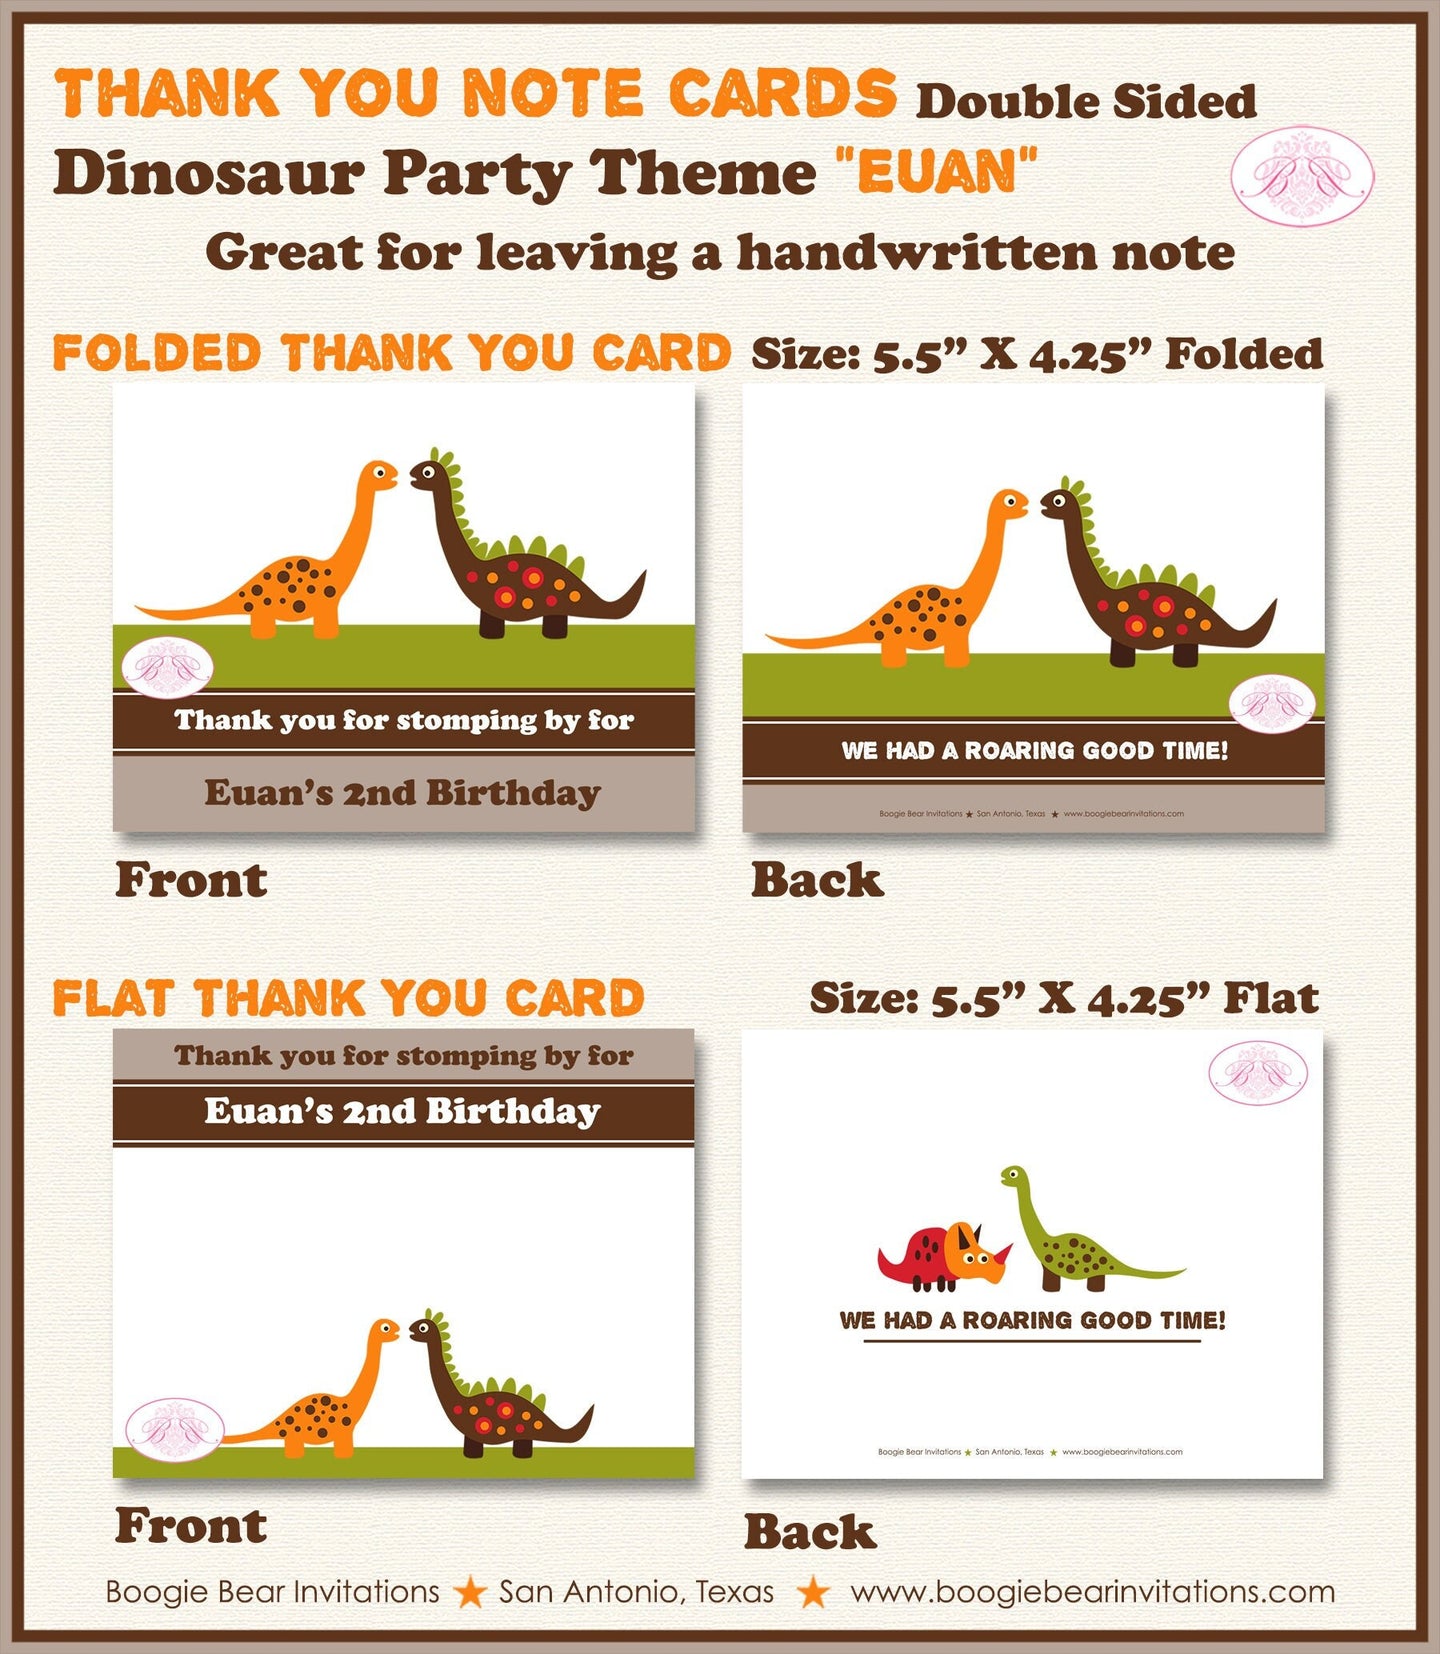 Dinosaur Birthday Party Thank You Card Little Dino Flat Folded Note Boy Girl Red Brown Stomp Roar Boogie Bear Invitations Euan Theme Printed